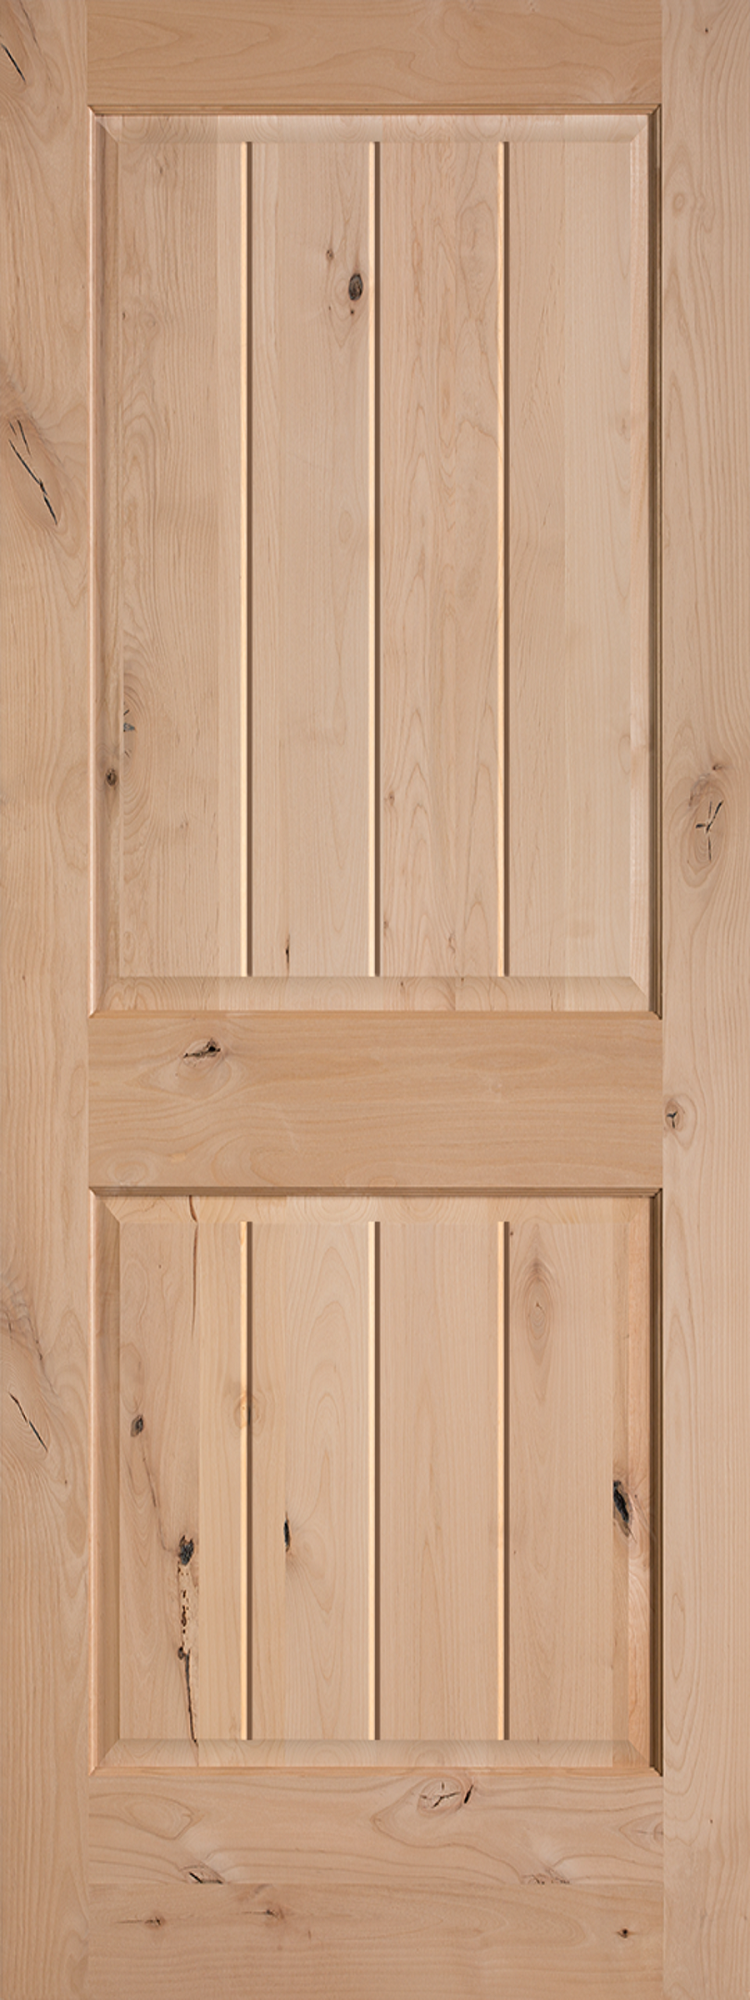 Knotty alder wood door for home’s interior features a two- panel design with V-shaped grooves to add dimension